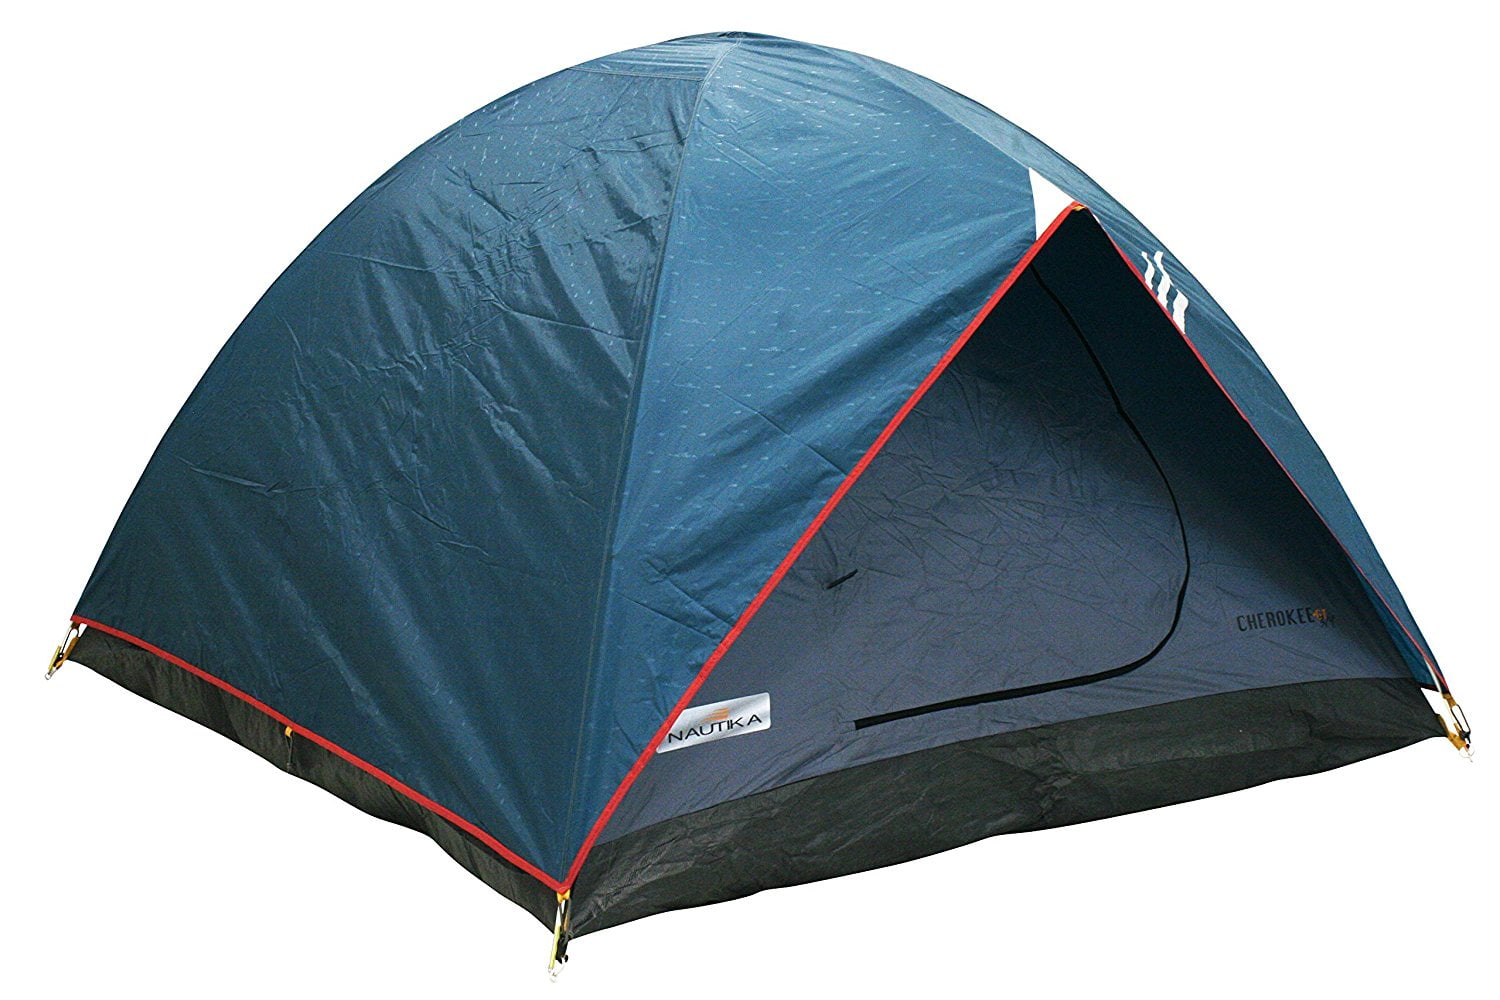 NTK Cherokee GT 8 to 9 Person 10 by 12 Foot Sport Camping Dome Tent 100%  Waterproof 2500mm 3 Seasons